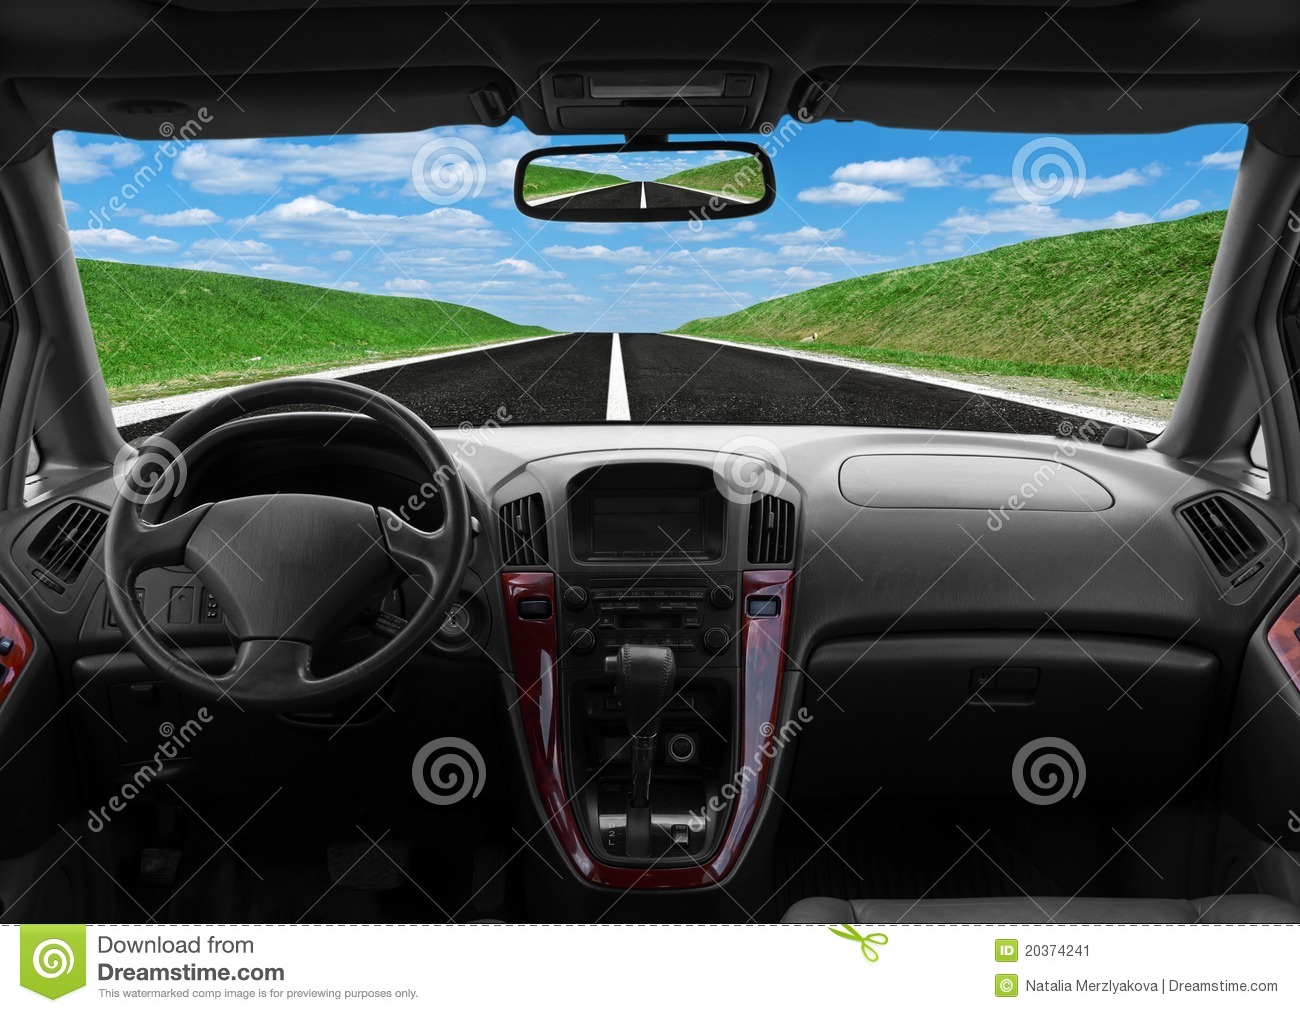 View From Inside A Car Clipart.